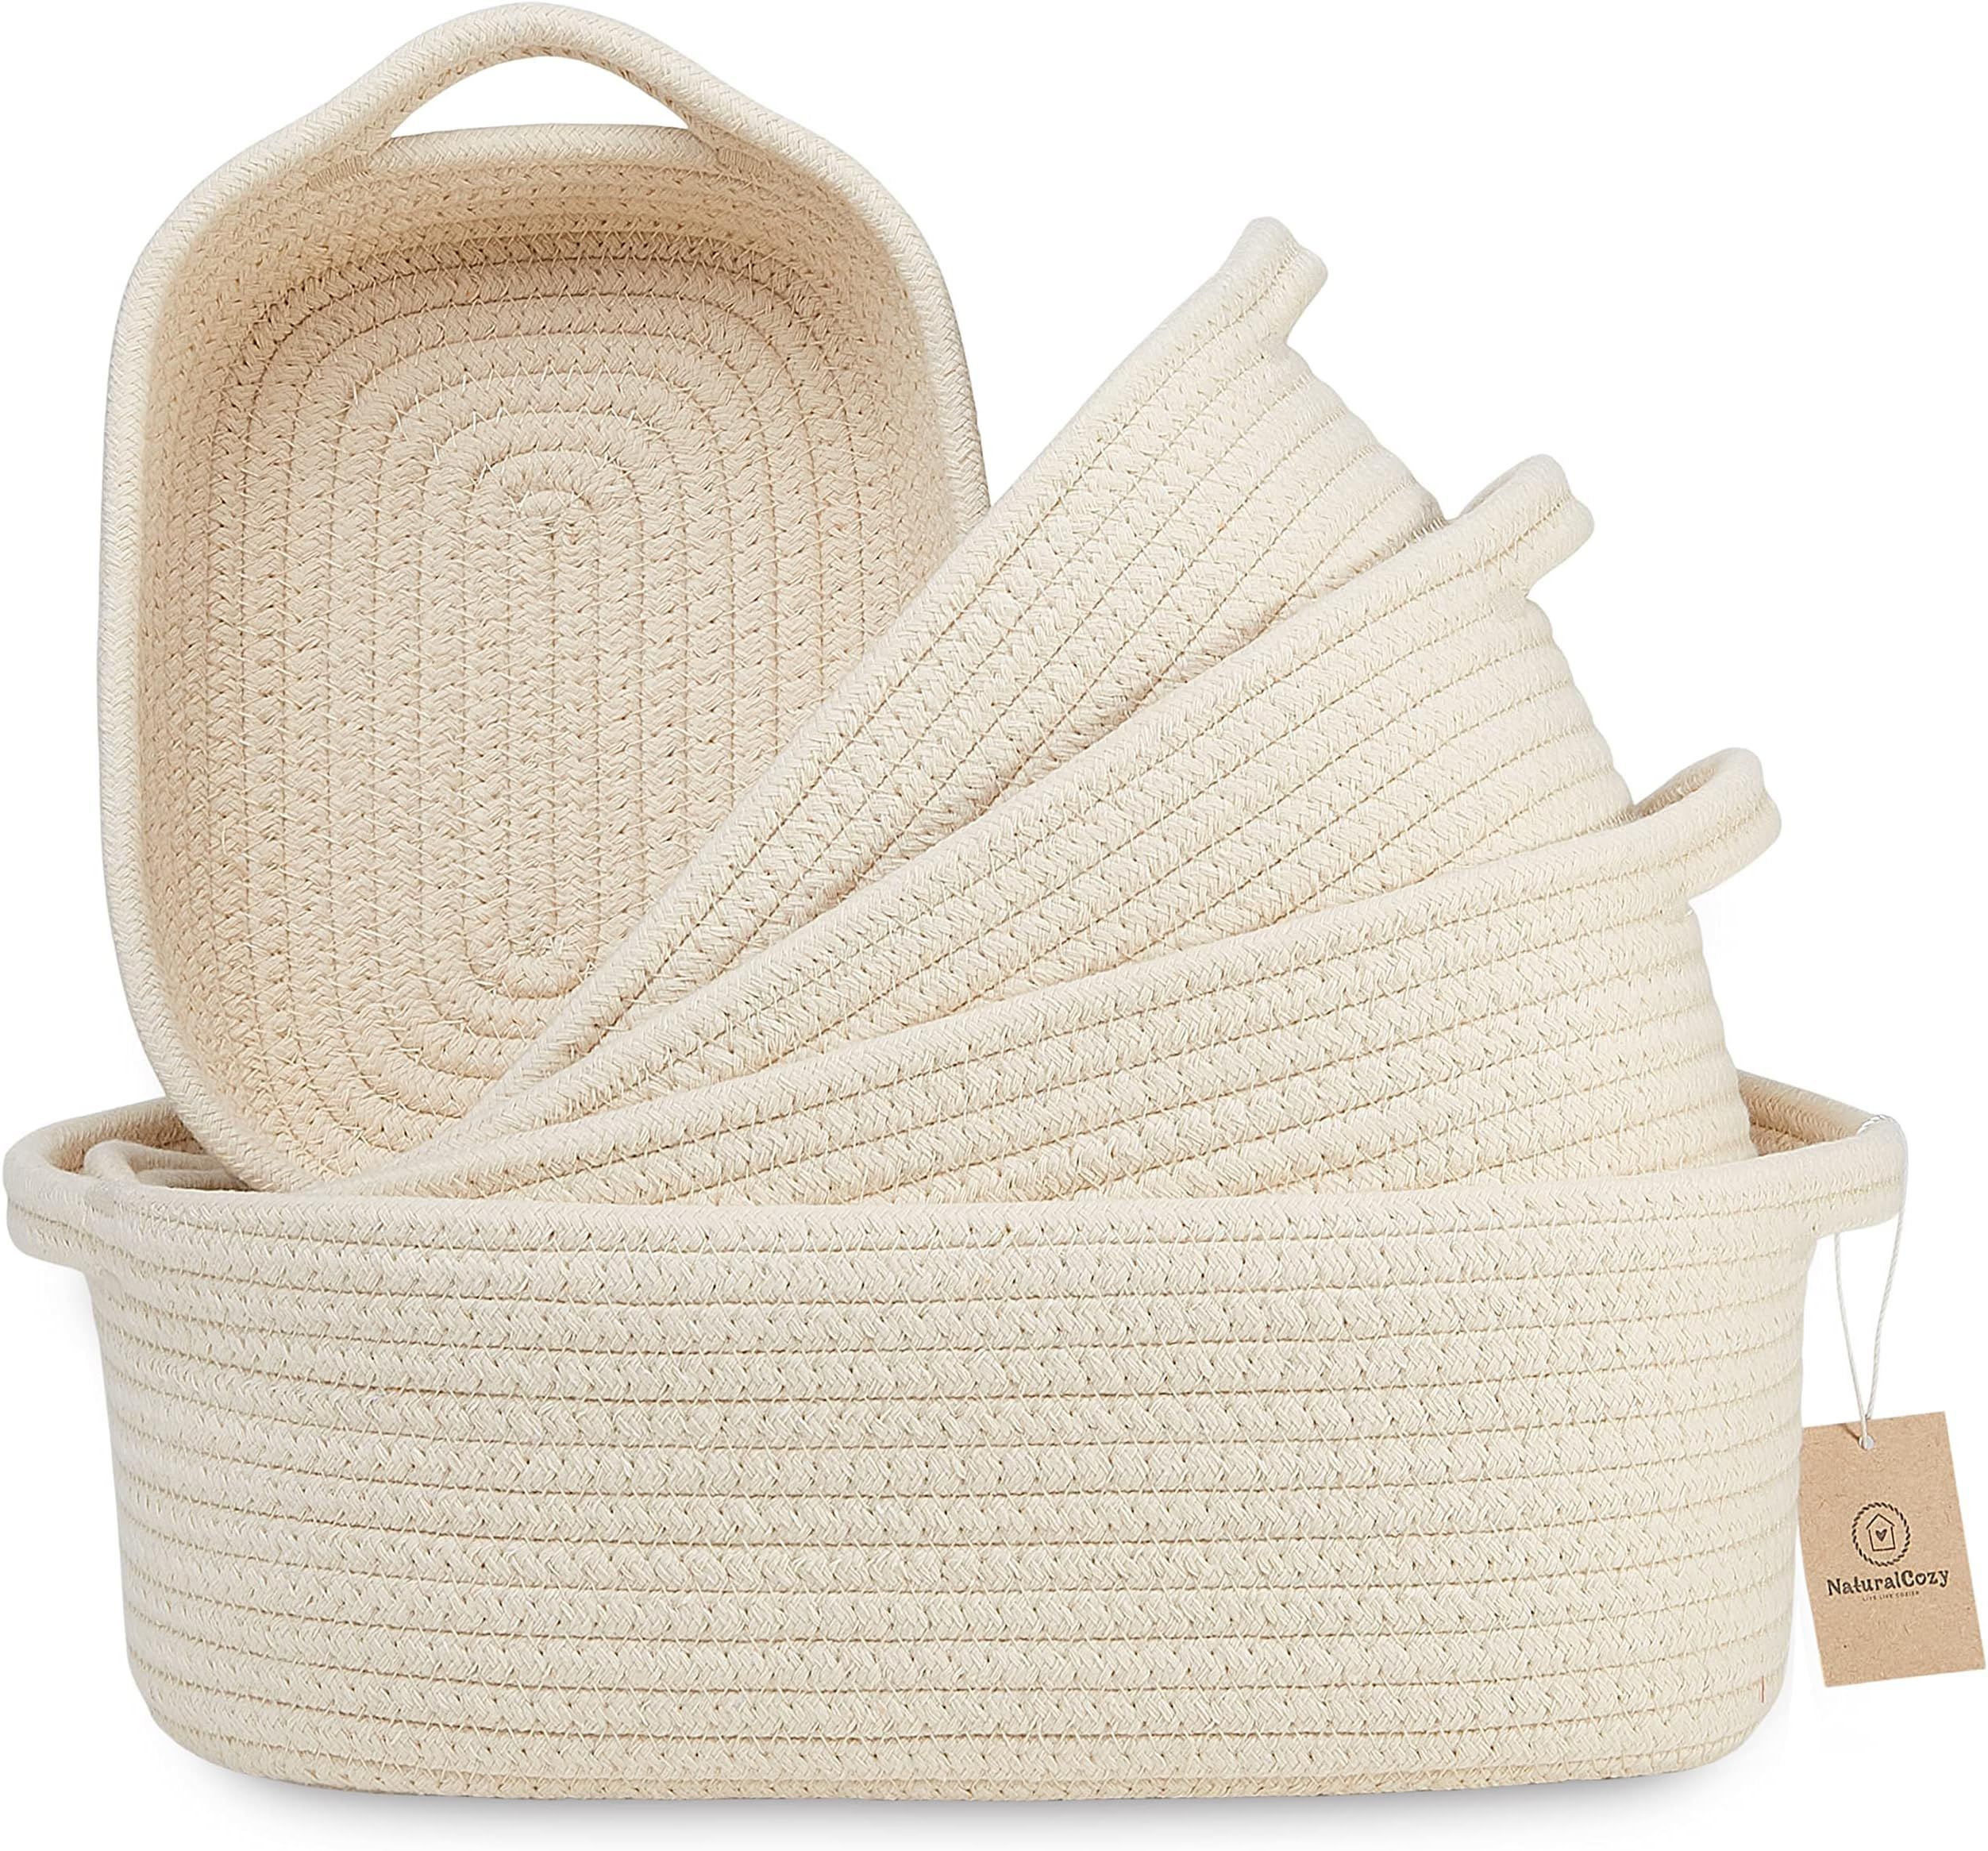 NaturalCozy 5-Piece Rectangle Storage Basket Set- Natural Cotton Rope Woven Baskets for Organizing!  | Amazon (US)